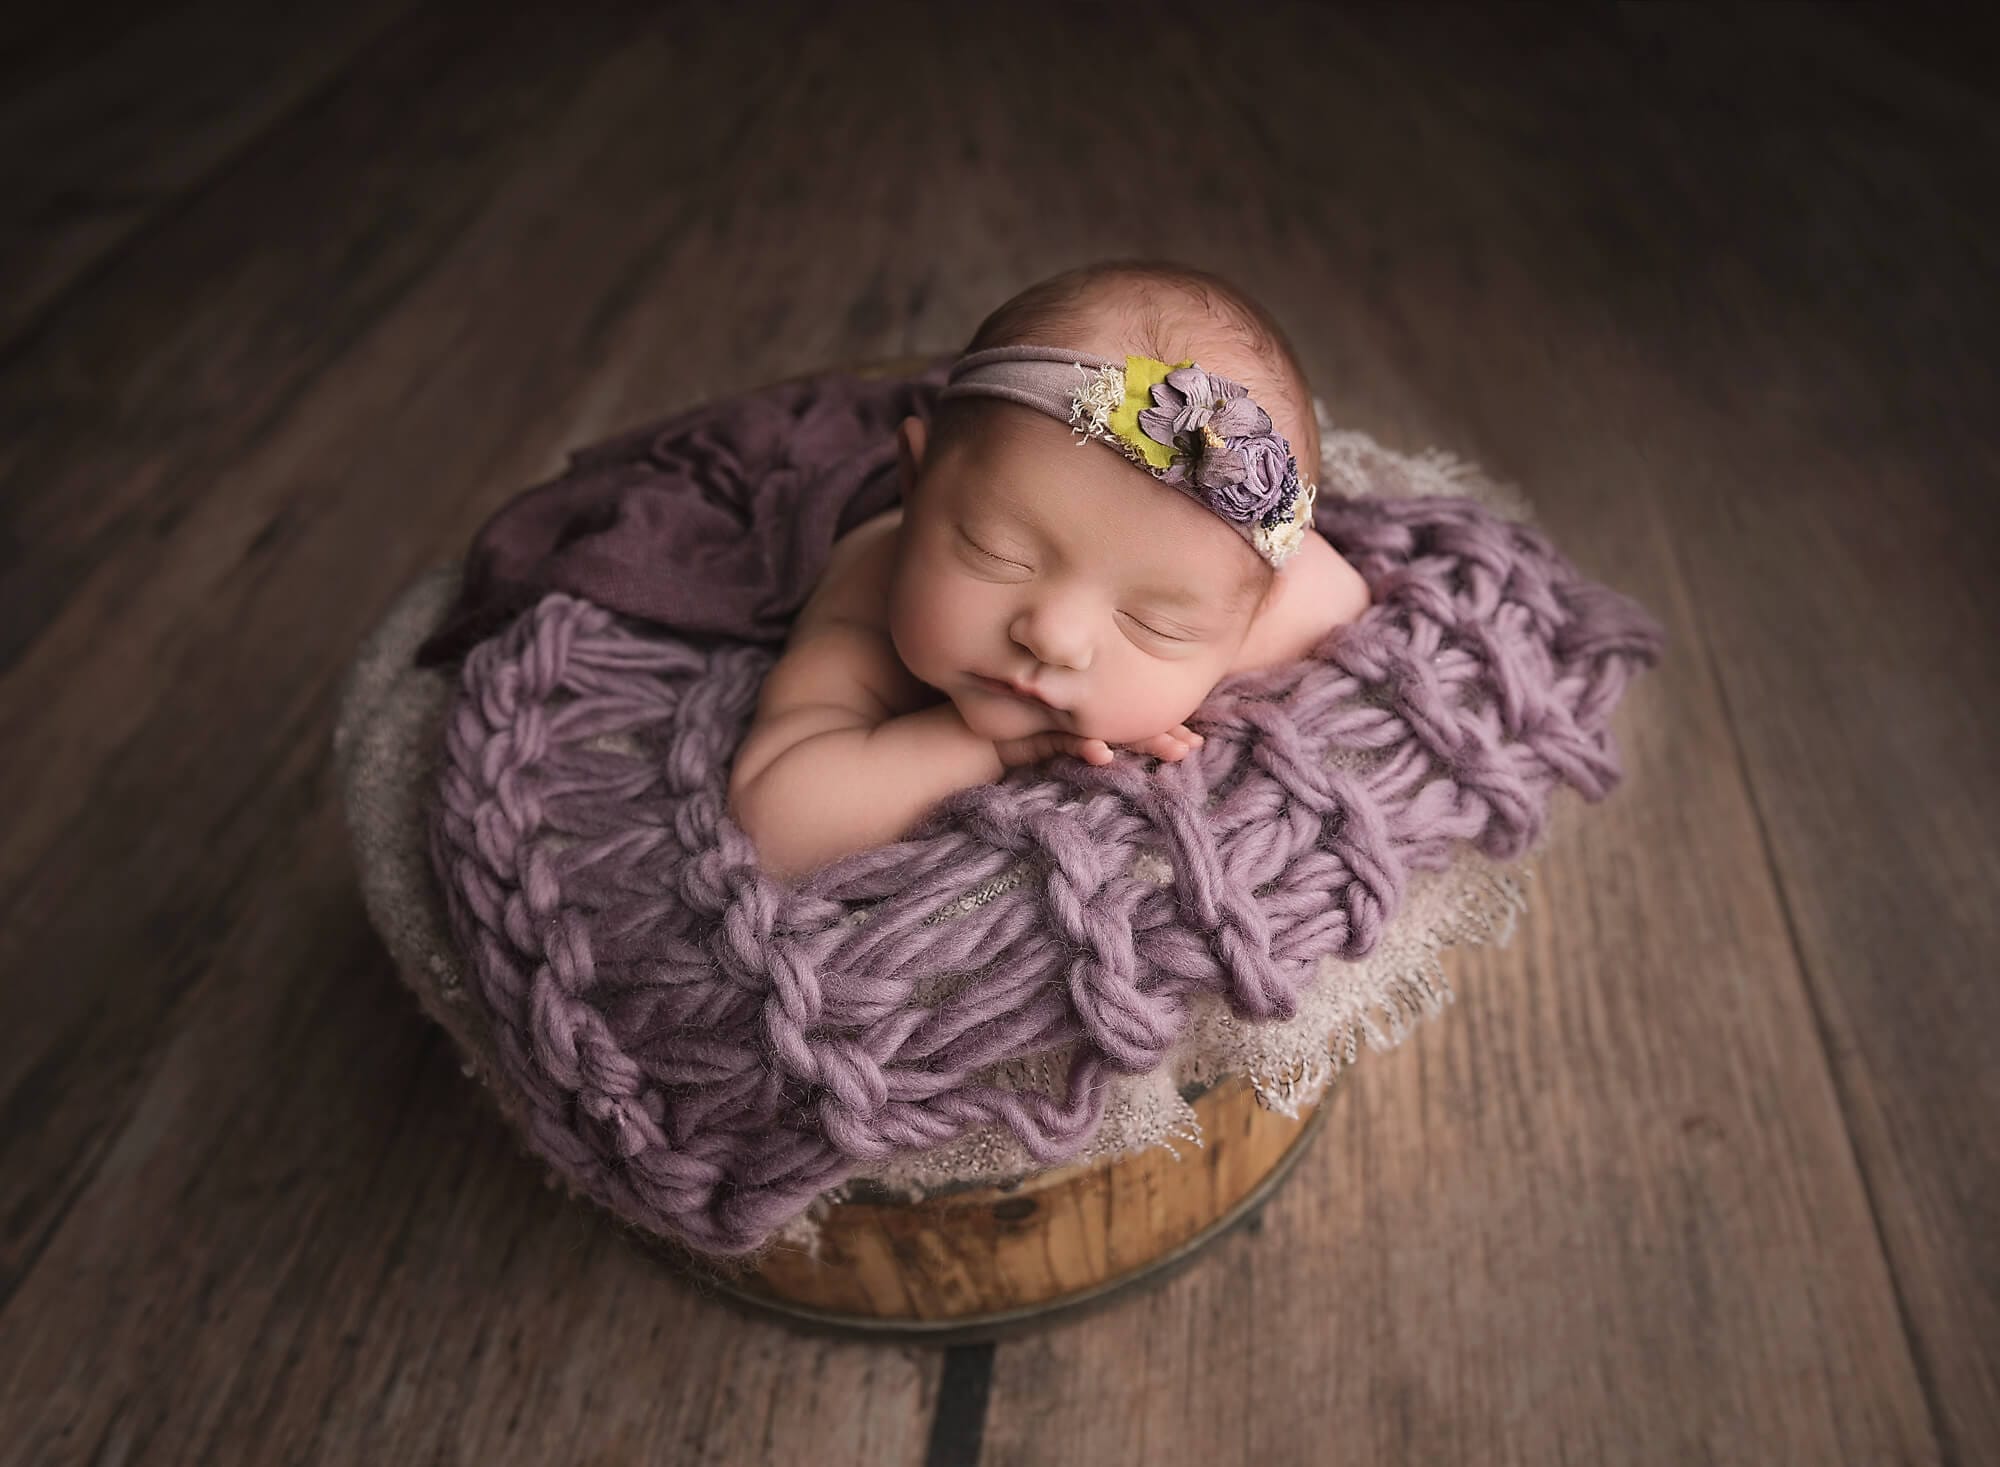 A newborn baby girl with Lafayette's newborn photographer posed in a basket with a lavender floral headband, her chin resting on her hands.